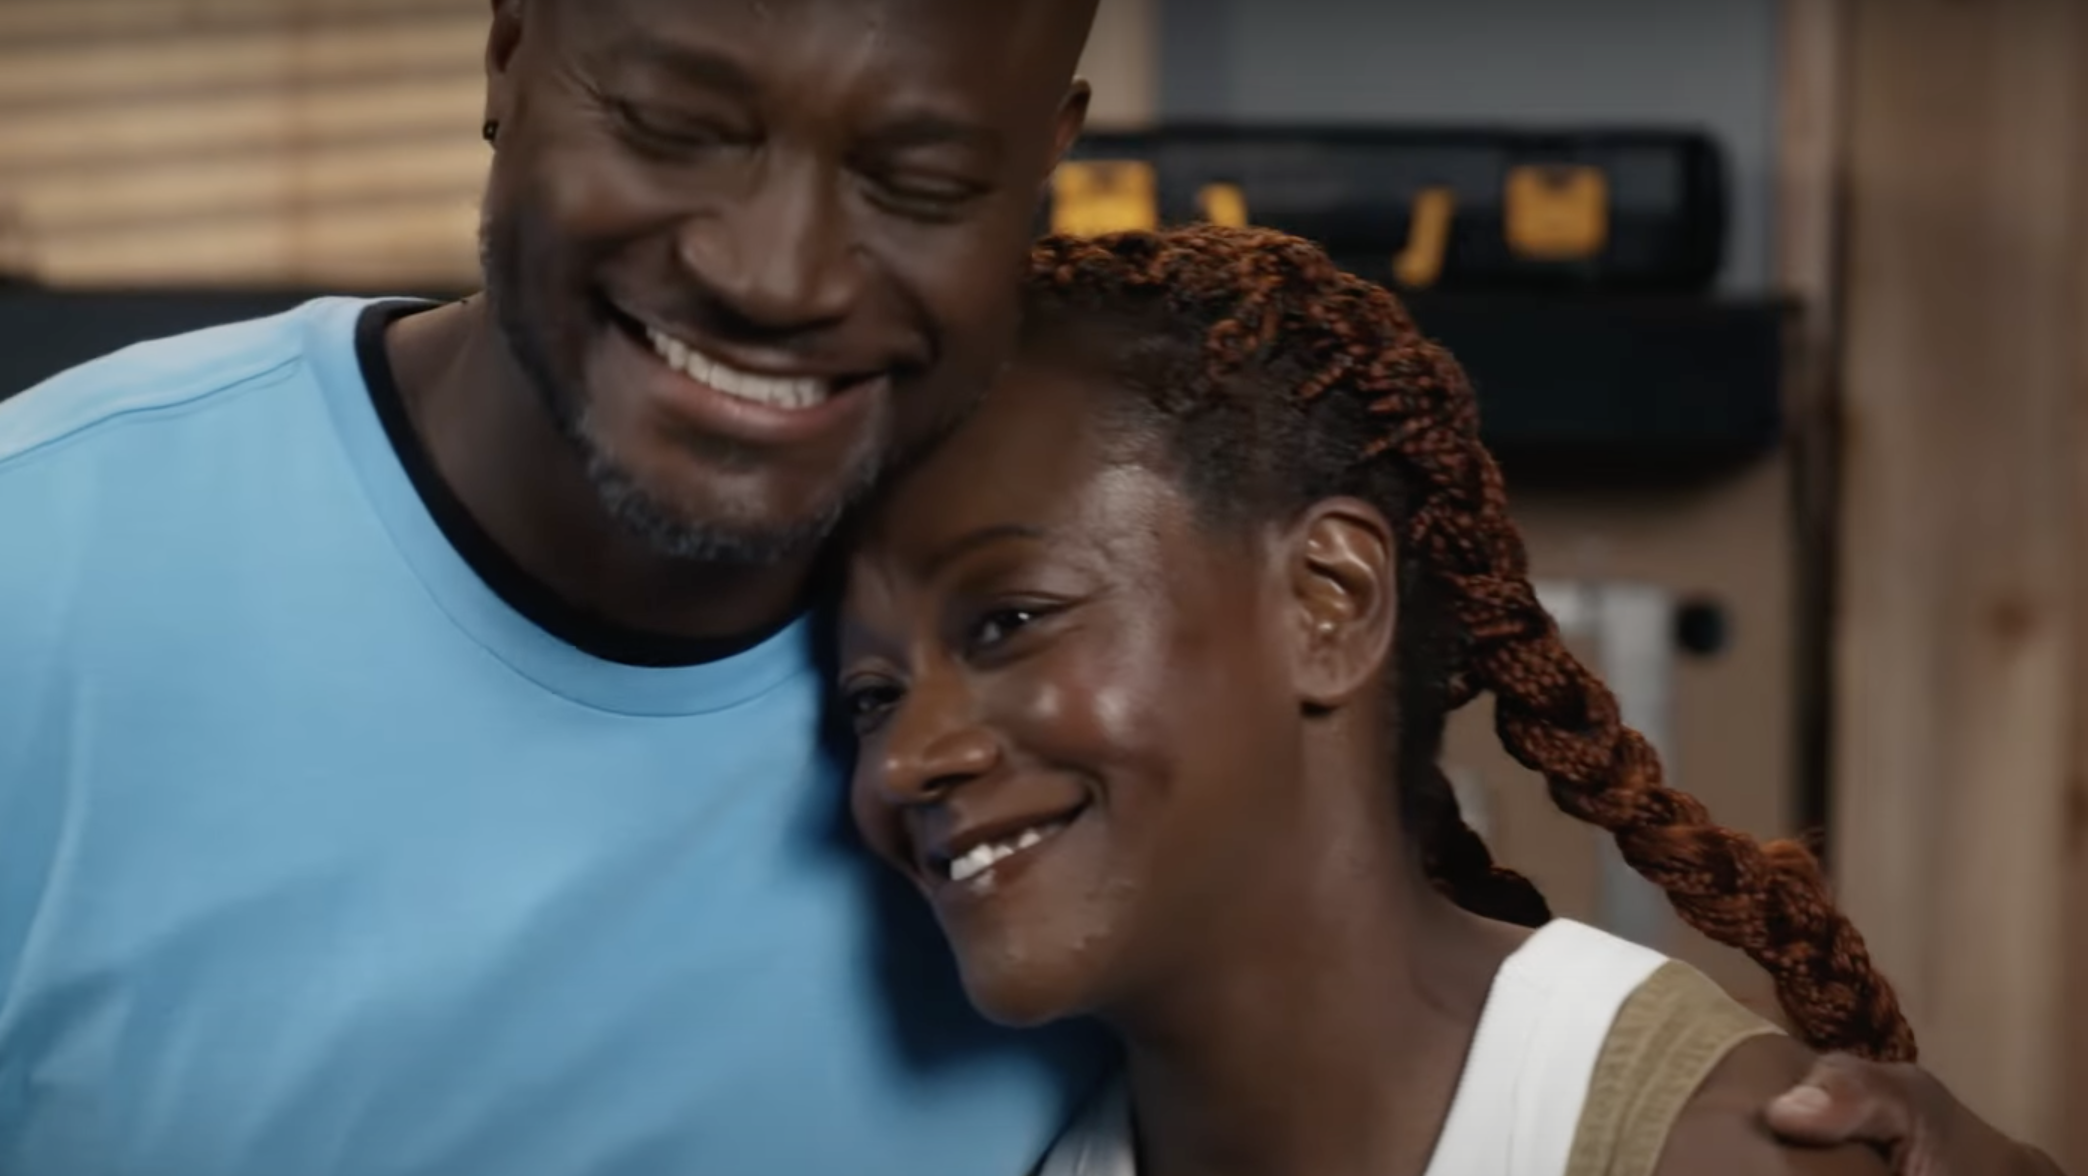 Taye Diggs and his sister discuss living with schizophrenia in a new campaign [Video]